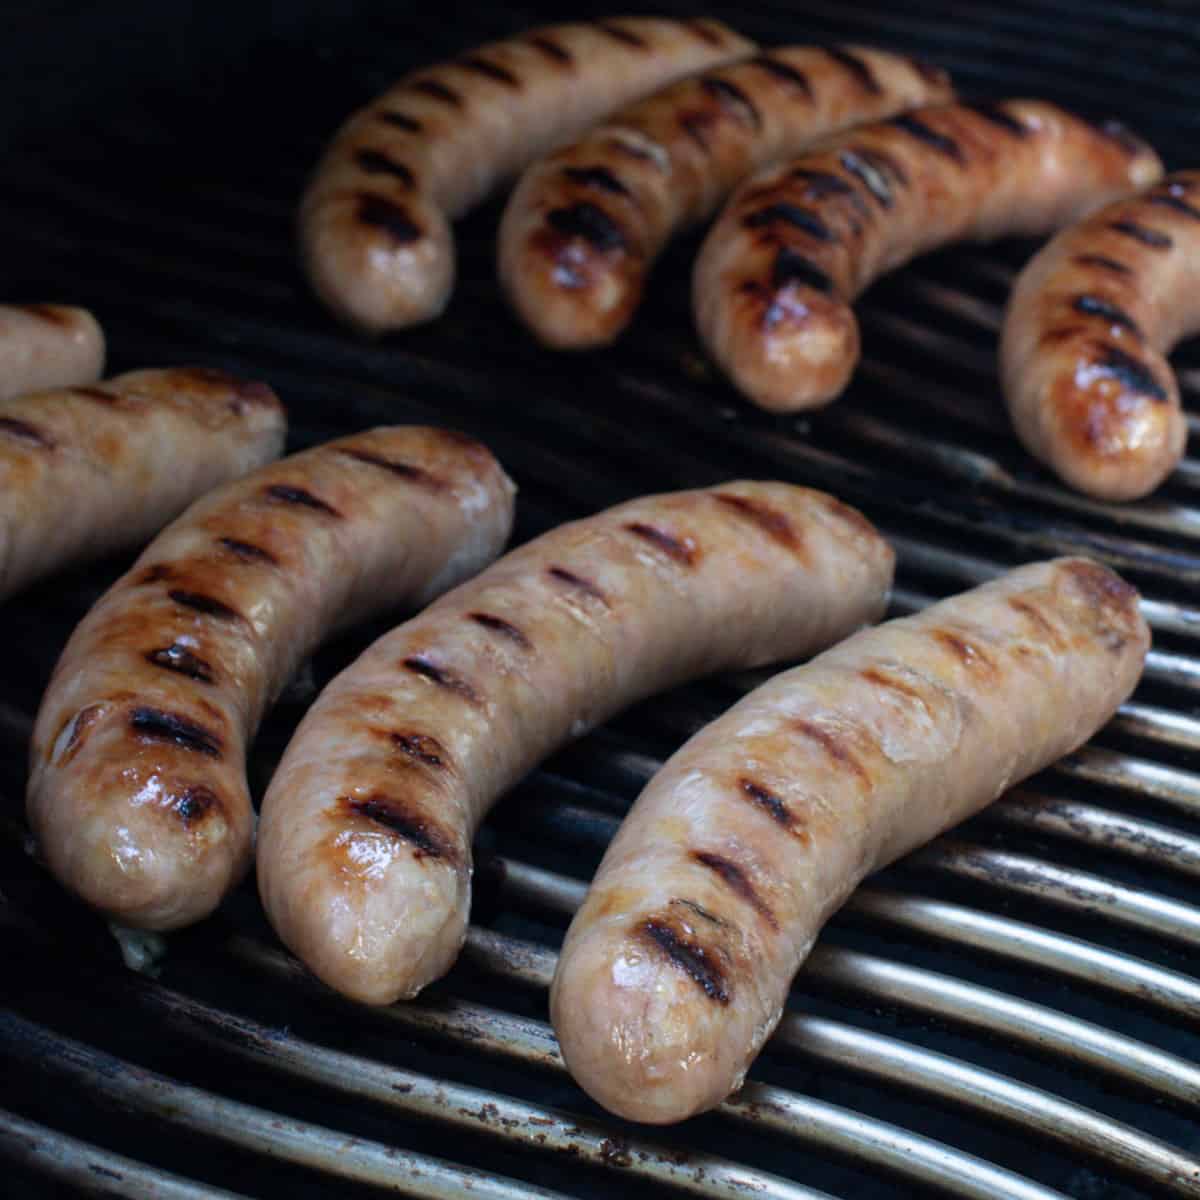 https://www.theblackpeppercorn.com/wp-content/uploads/2020/08/How-to-Grill-Italian-Sausages-Cook-2.jpg